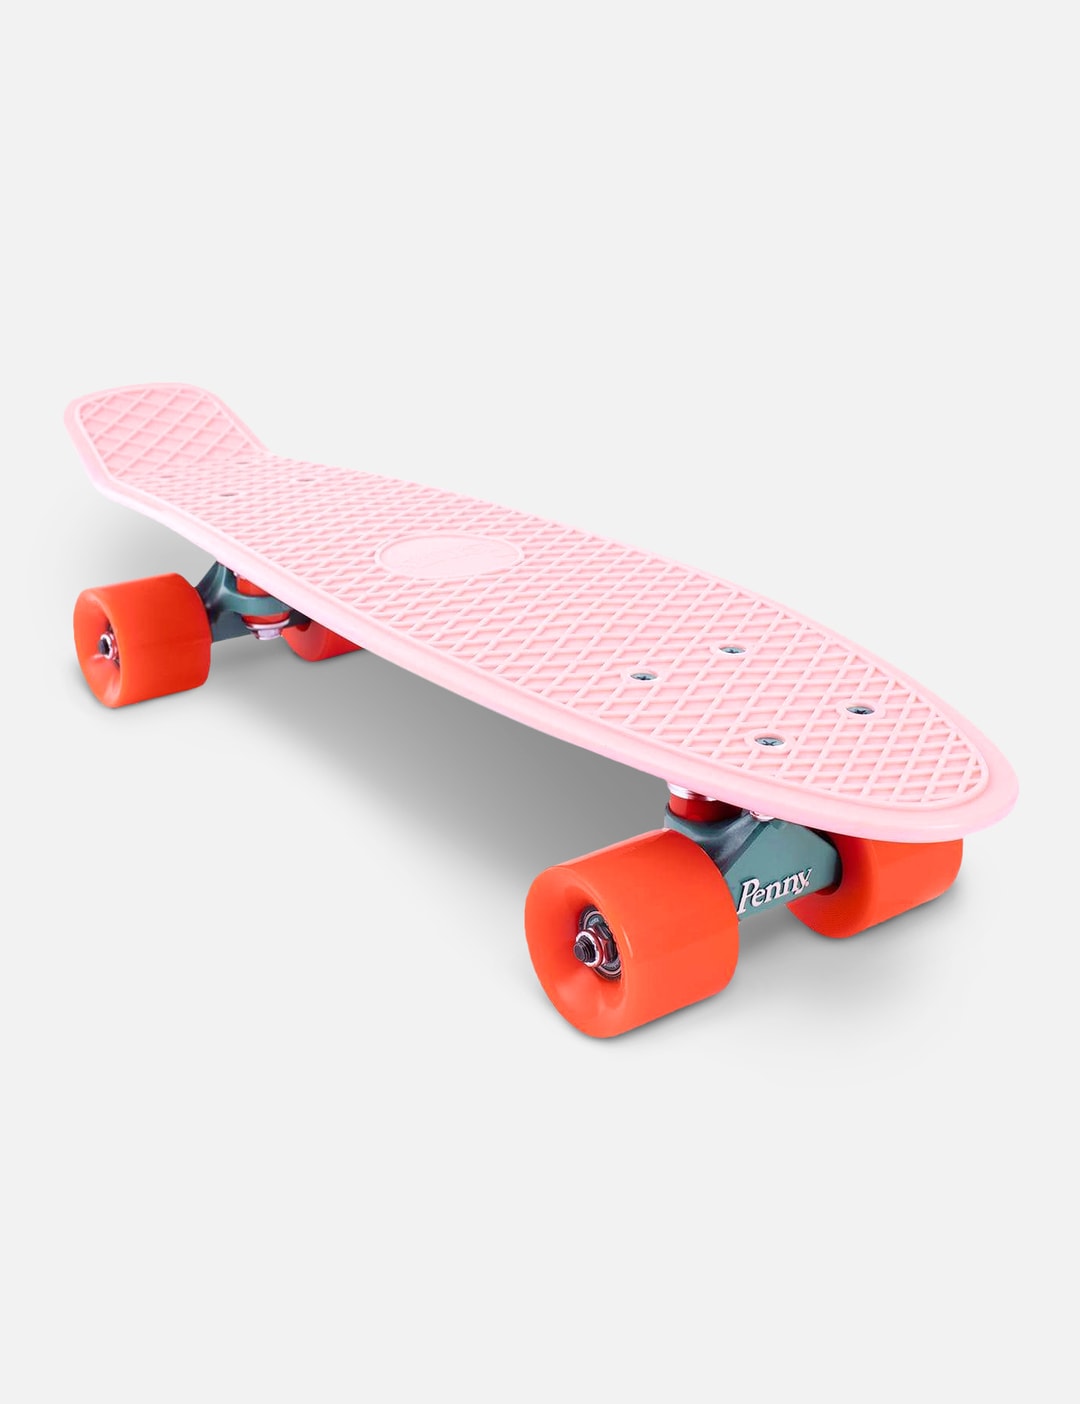 Penny Skateboards - Wanderlust Skateboard 22" | HBX - Globally Curated Fashion and Lifestyle by Hypebeast